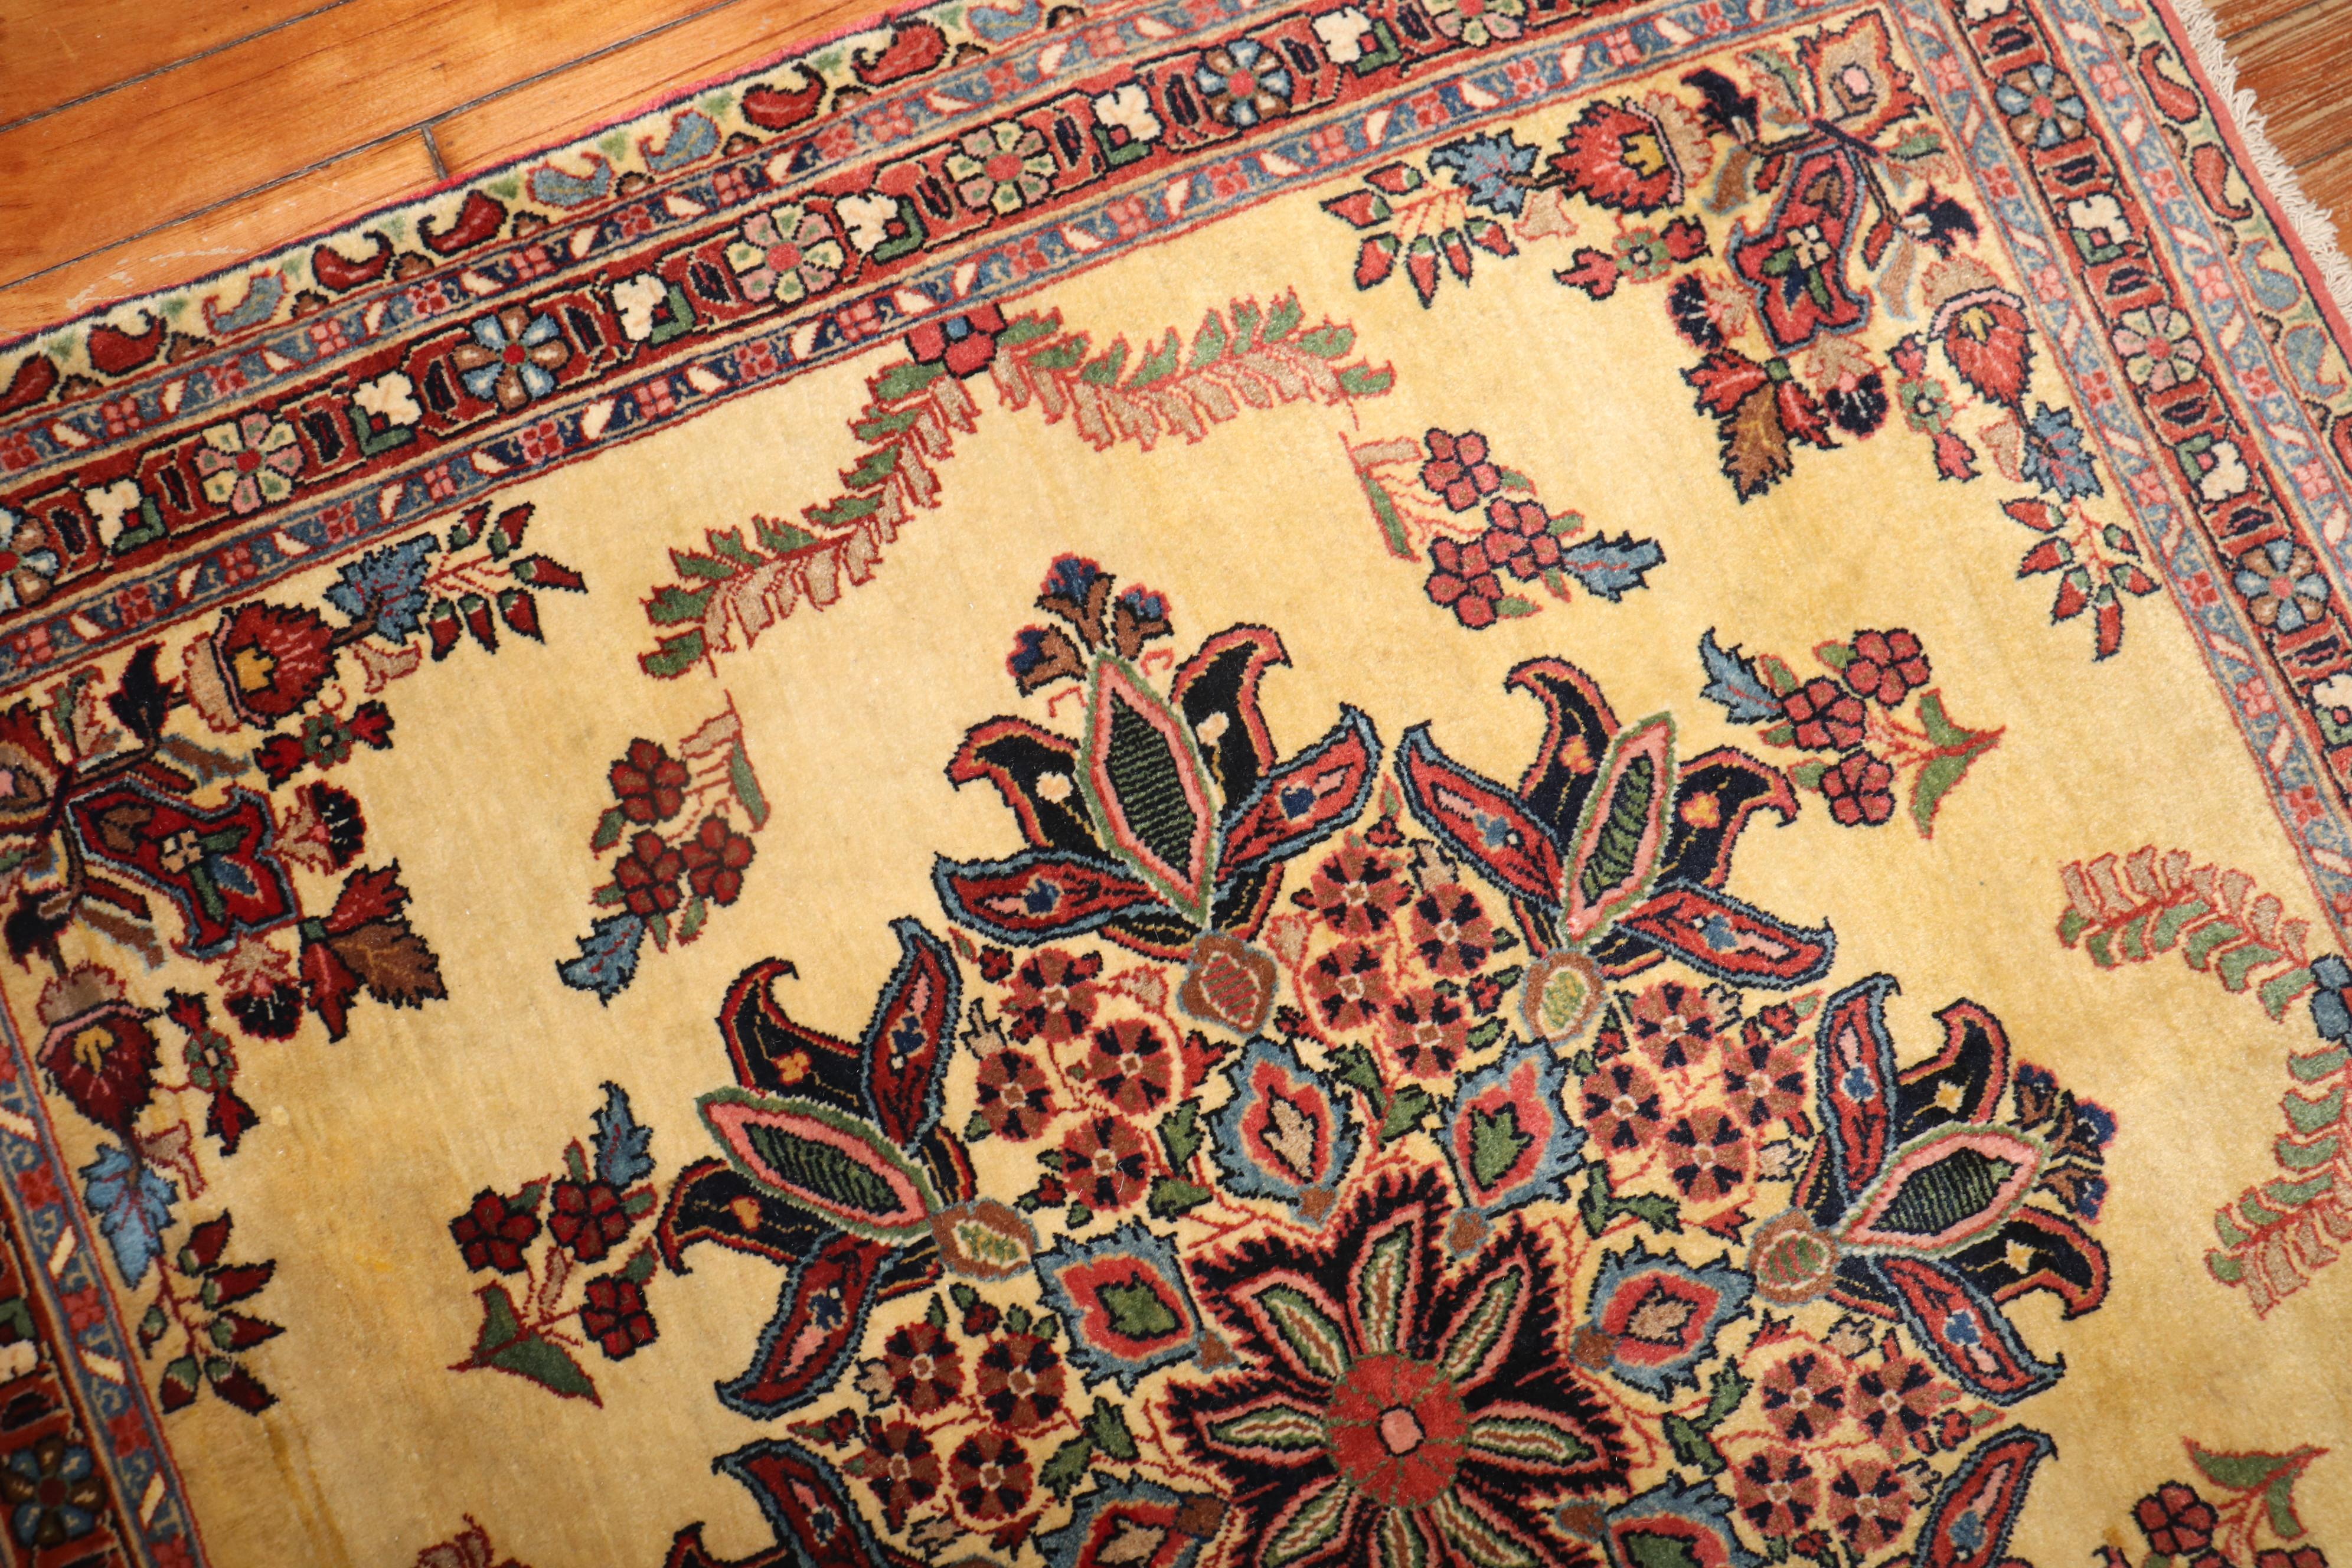 Zabihi Collection Ornate Square Yellow Ground Sarouk Rug In Good Condition For Sale In New York, NY